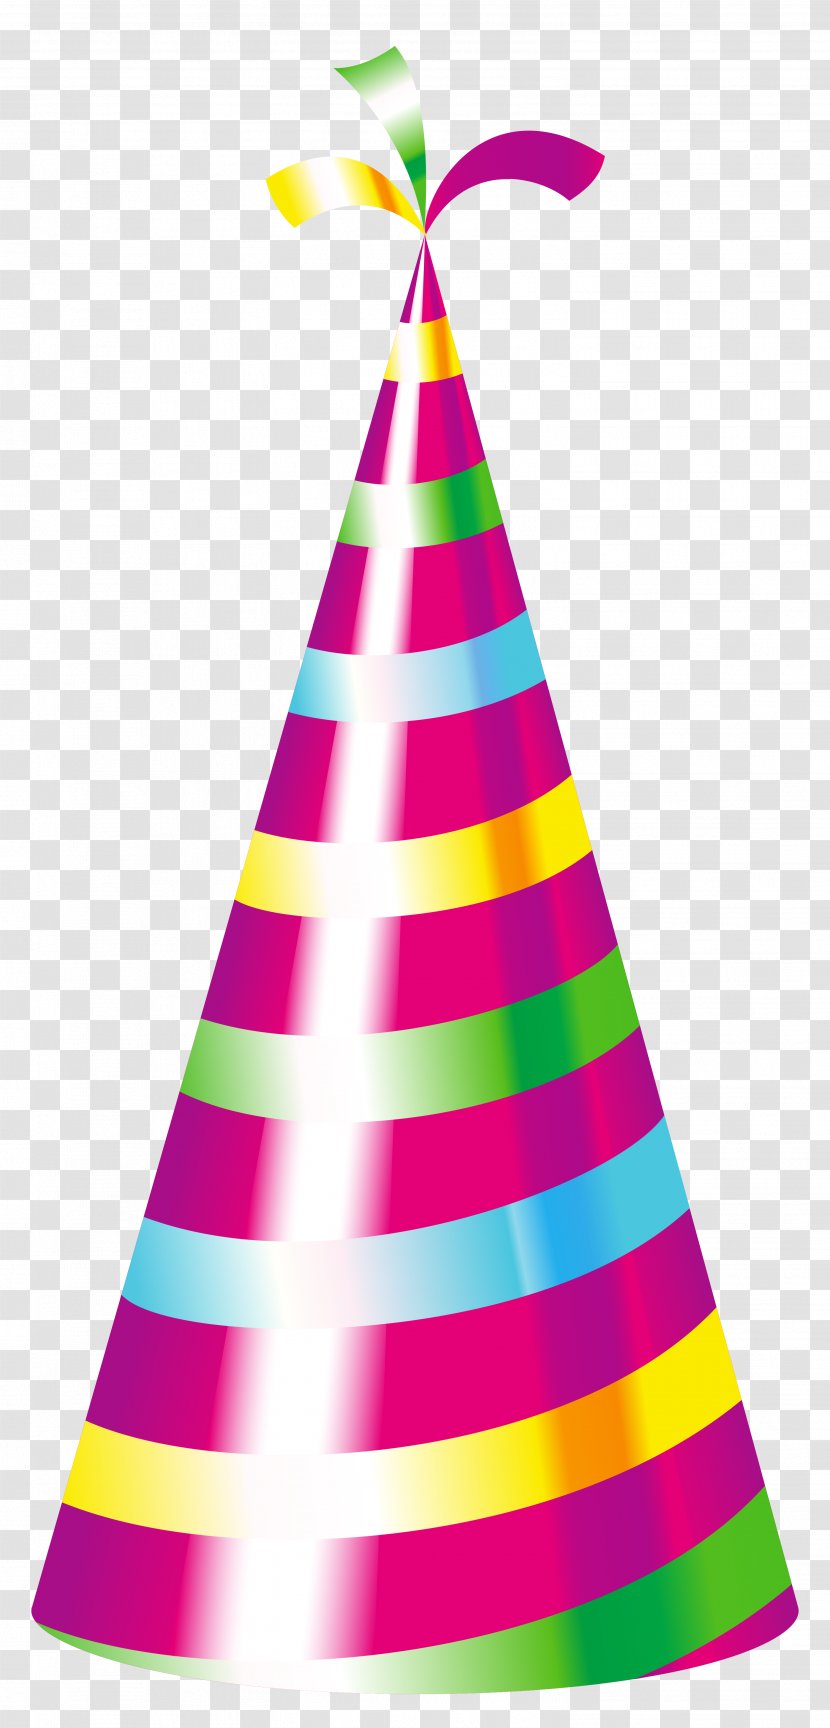 Birthday Cake Party Hat Clip Art - Happy To You Transparent PNG